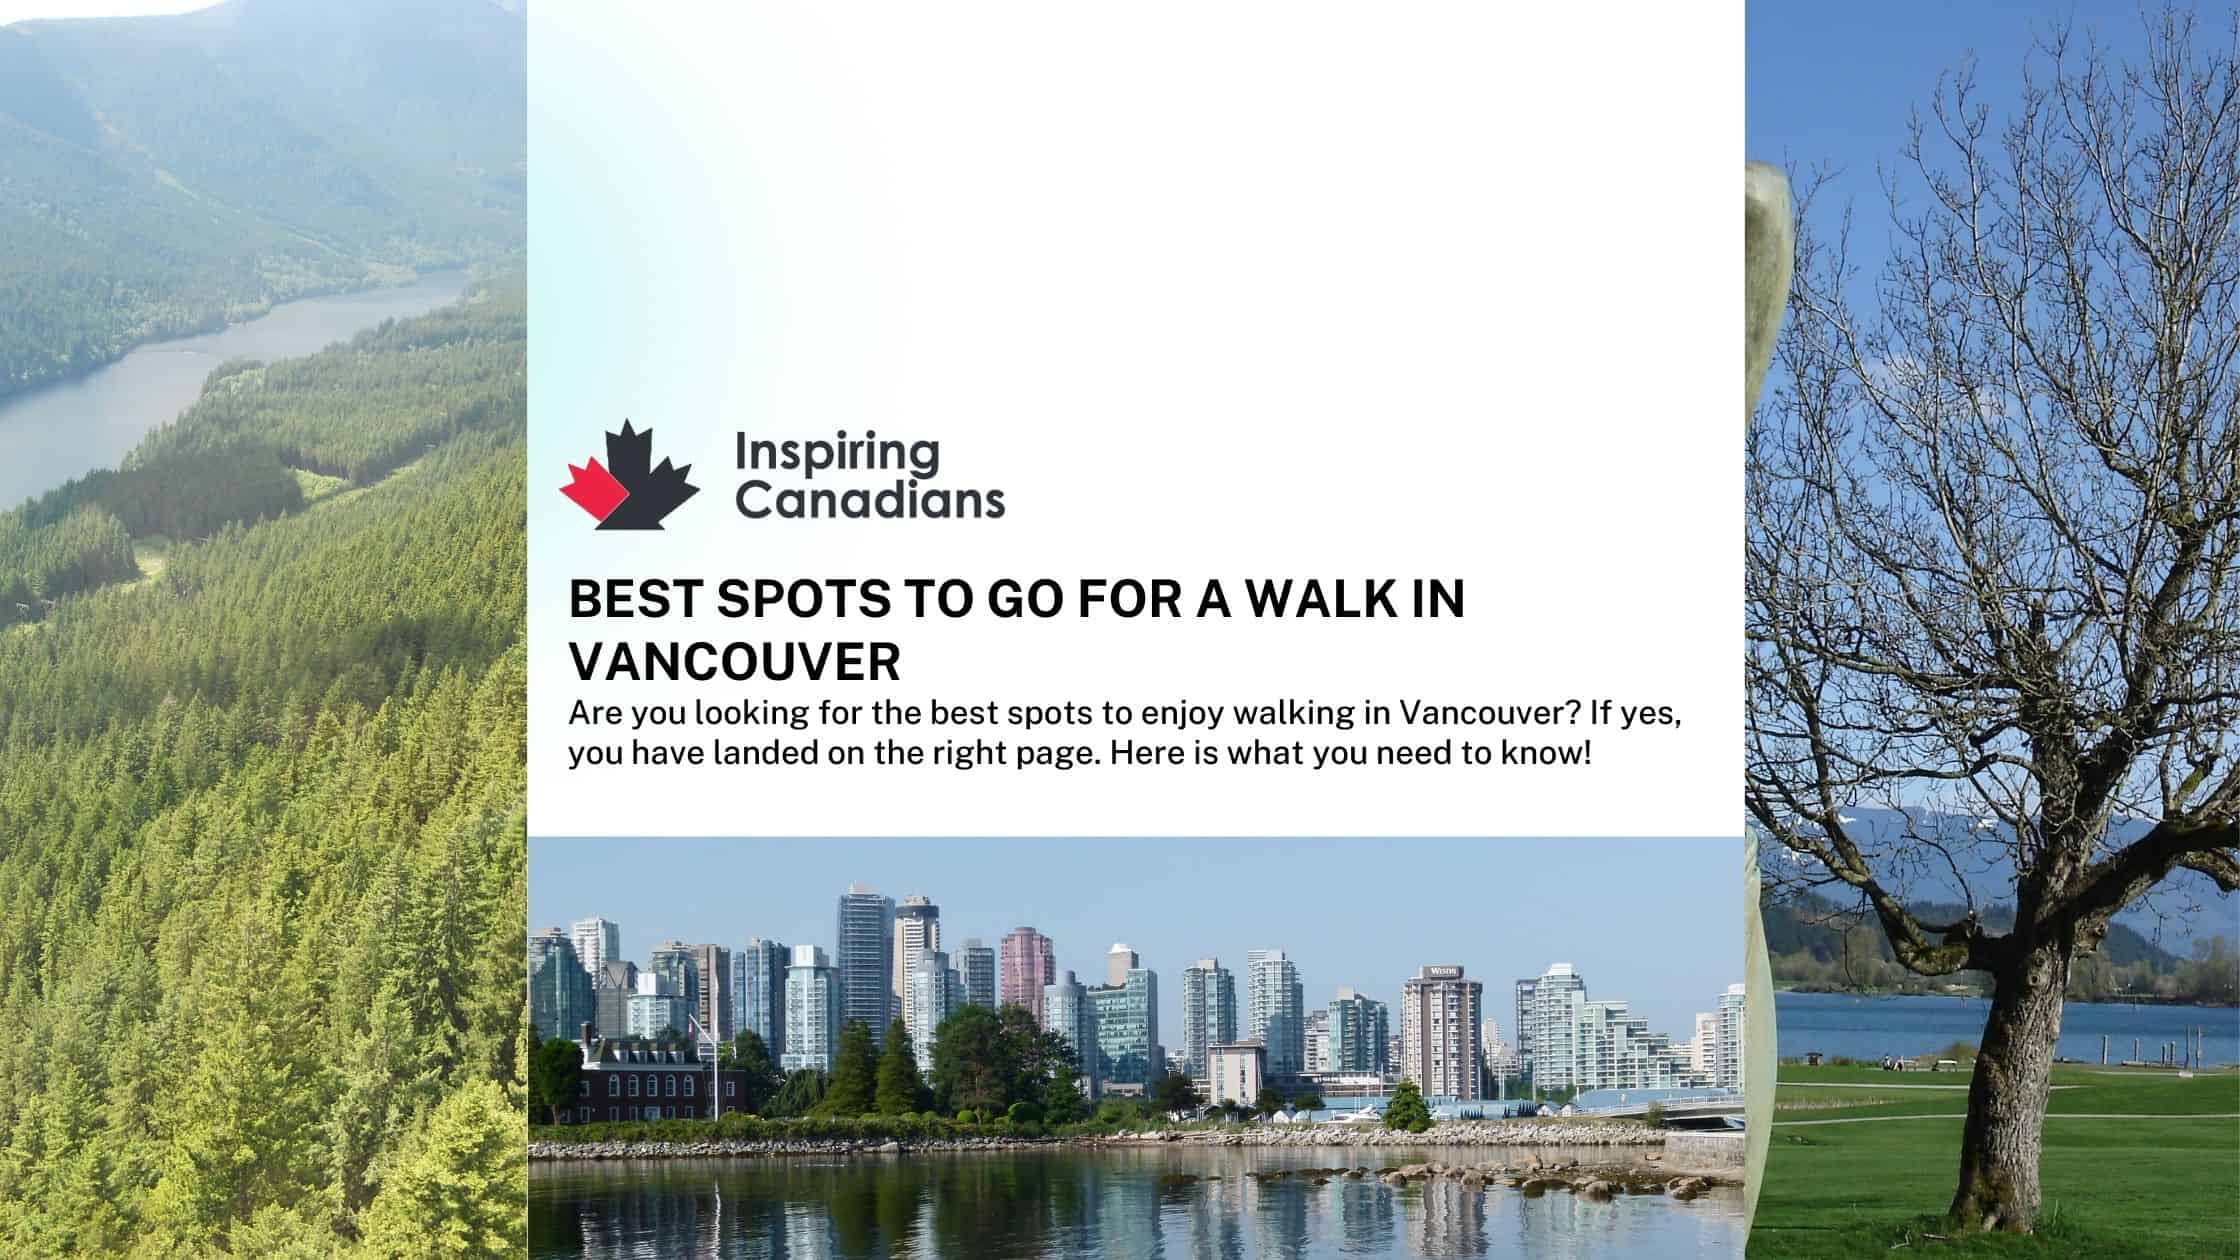 Best Spots to go for a walk in Vancouver